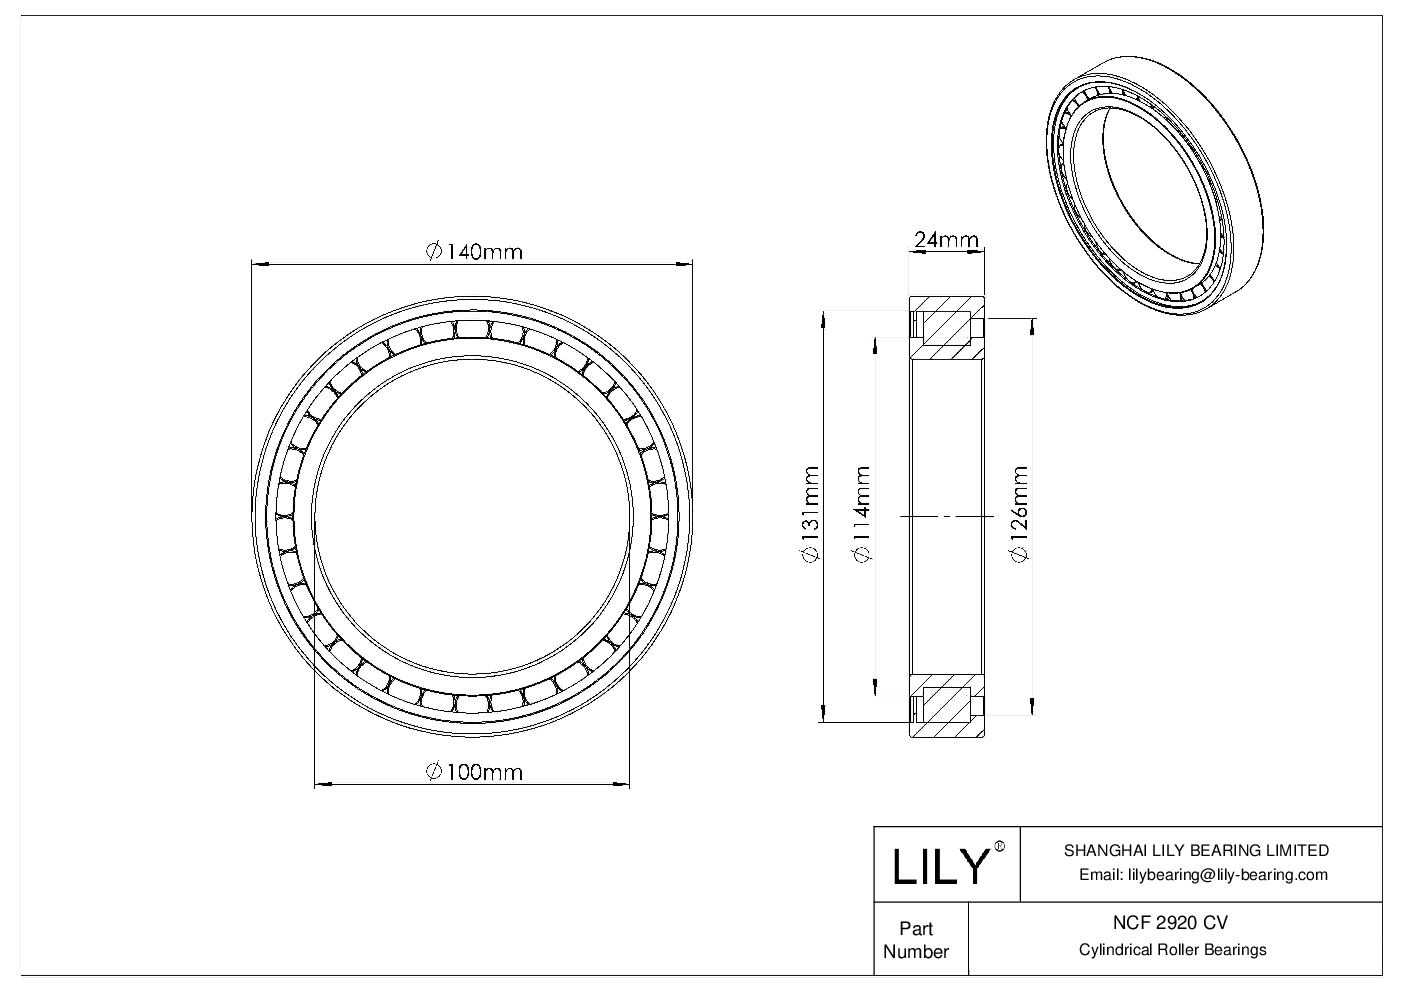 NCF 2920 CV Single Row Full Complement Cylindrical Roller Bearings cad drawing